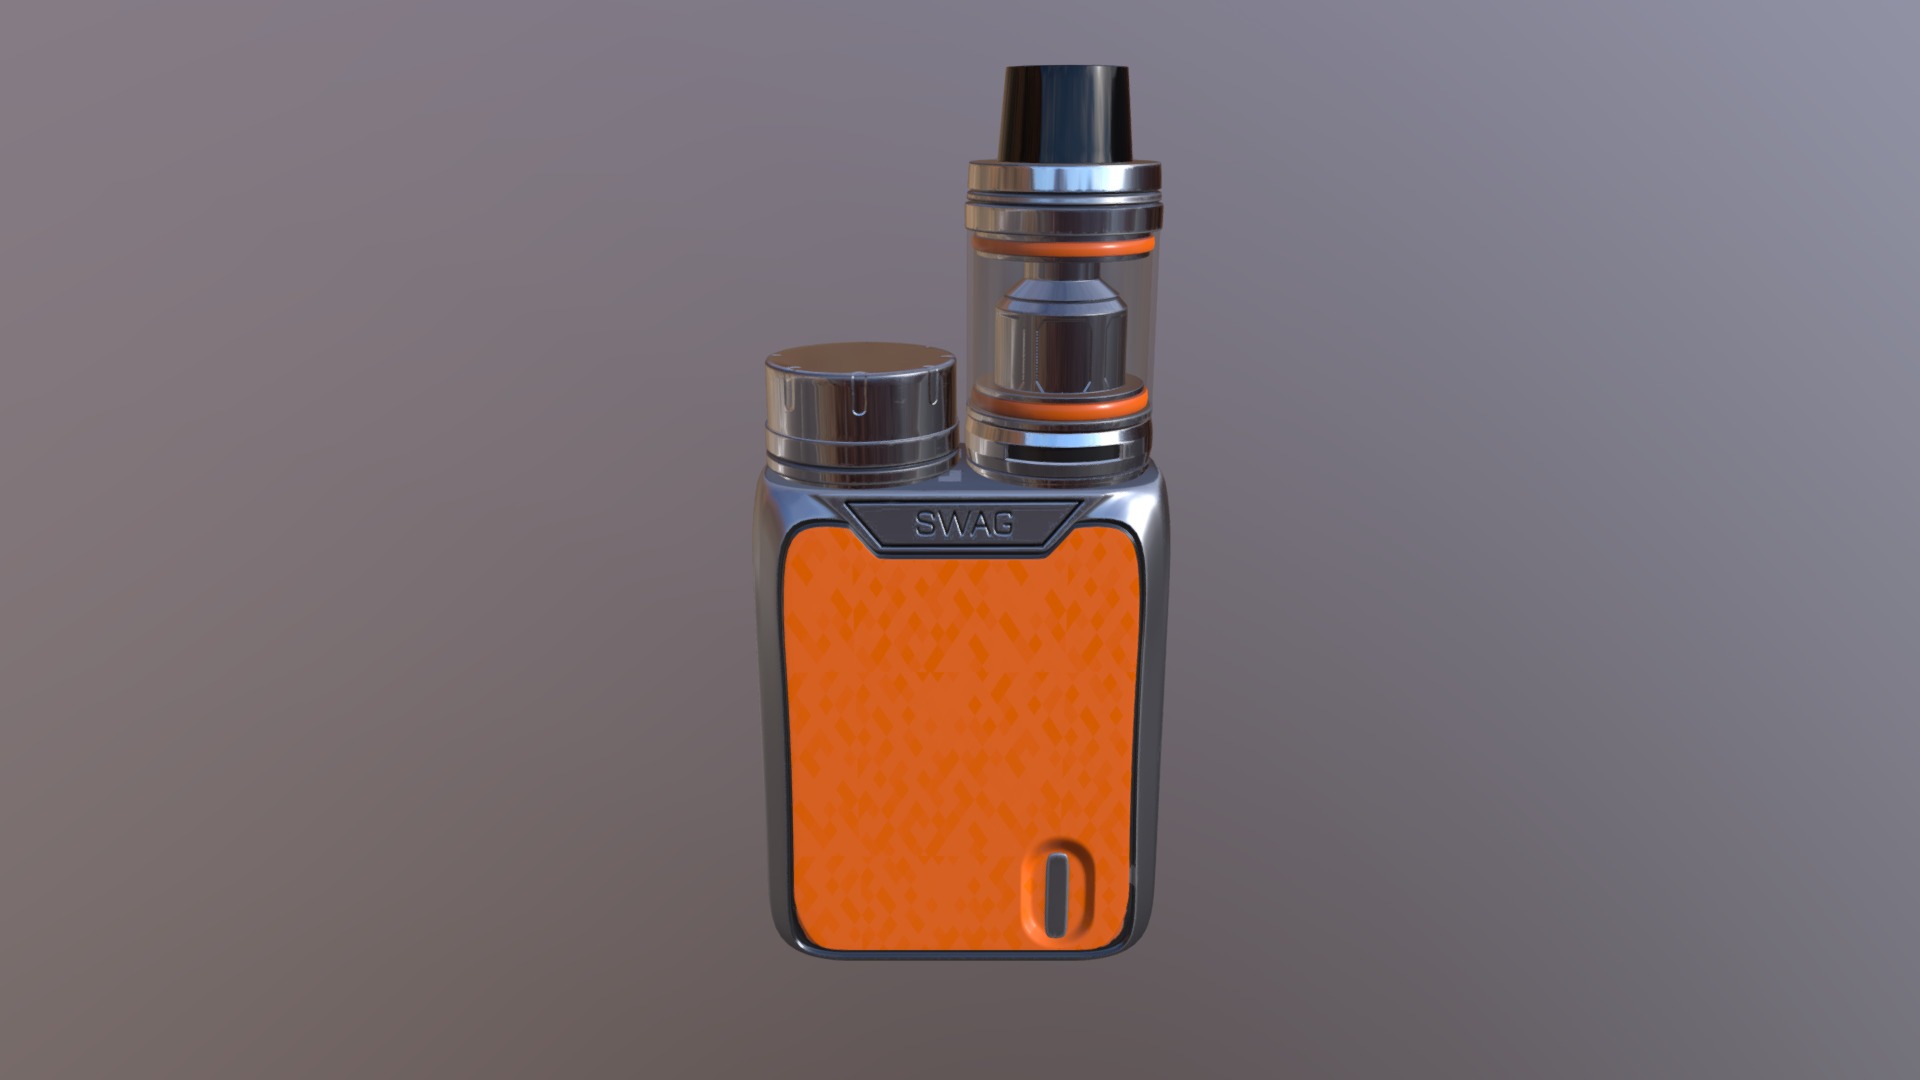 3D model Vaporesso Swag 80 Вт - This is a 3D model of the Vaporesso Swag 80 Вт. The 3D model is about a close-up of a bottle.